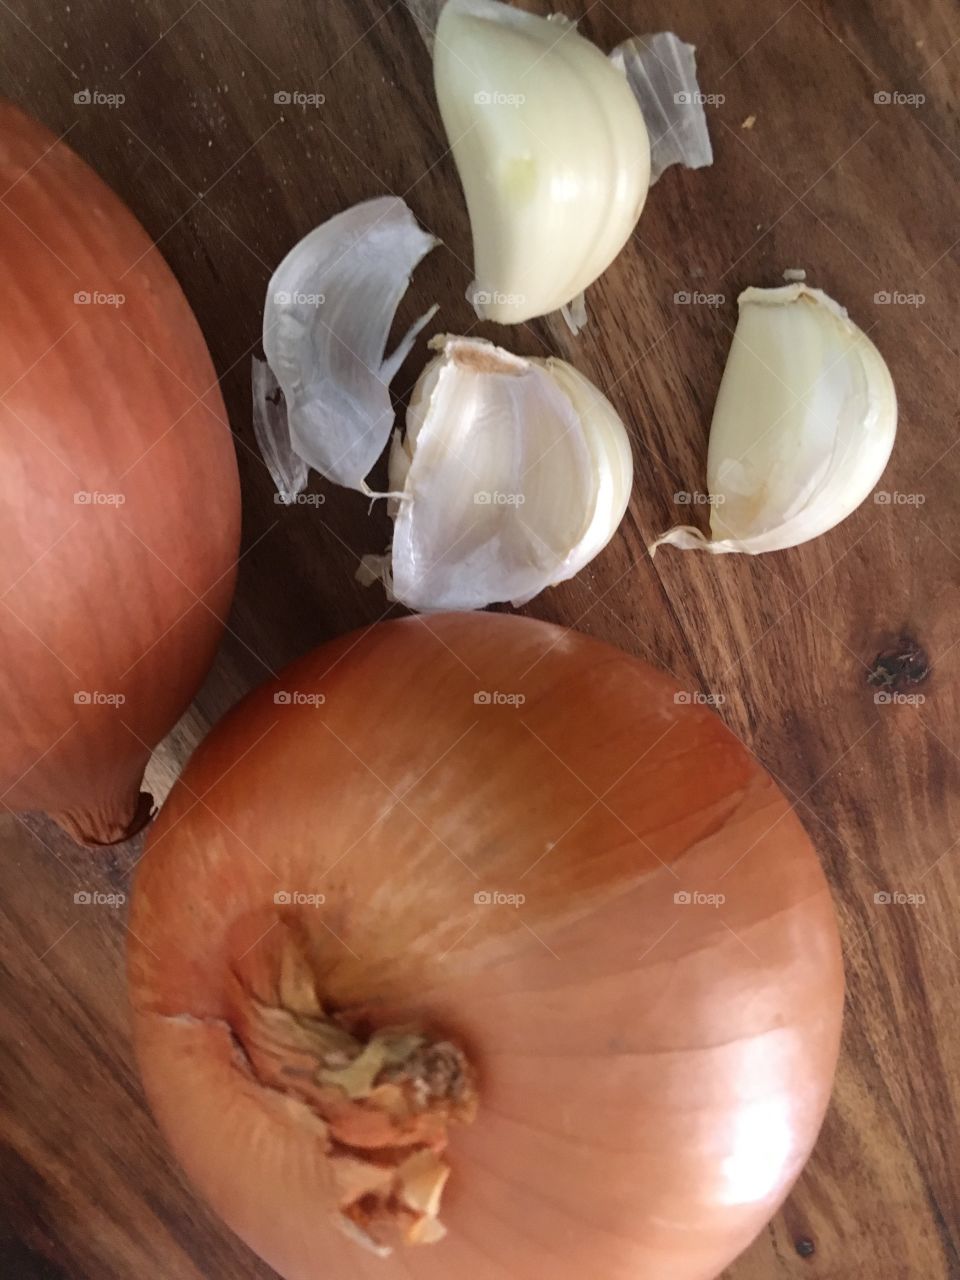 The Awesome wonders of onions and garlic 